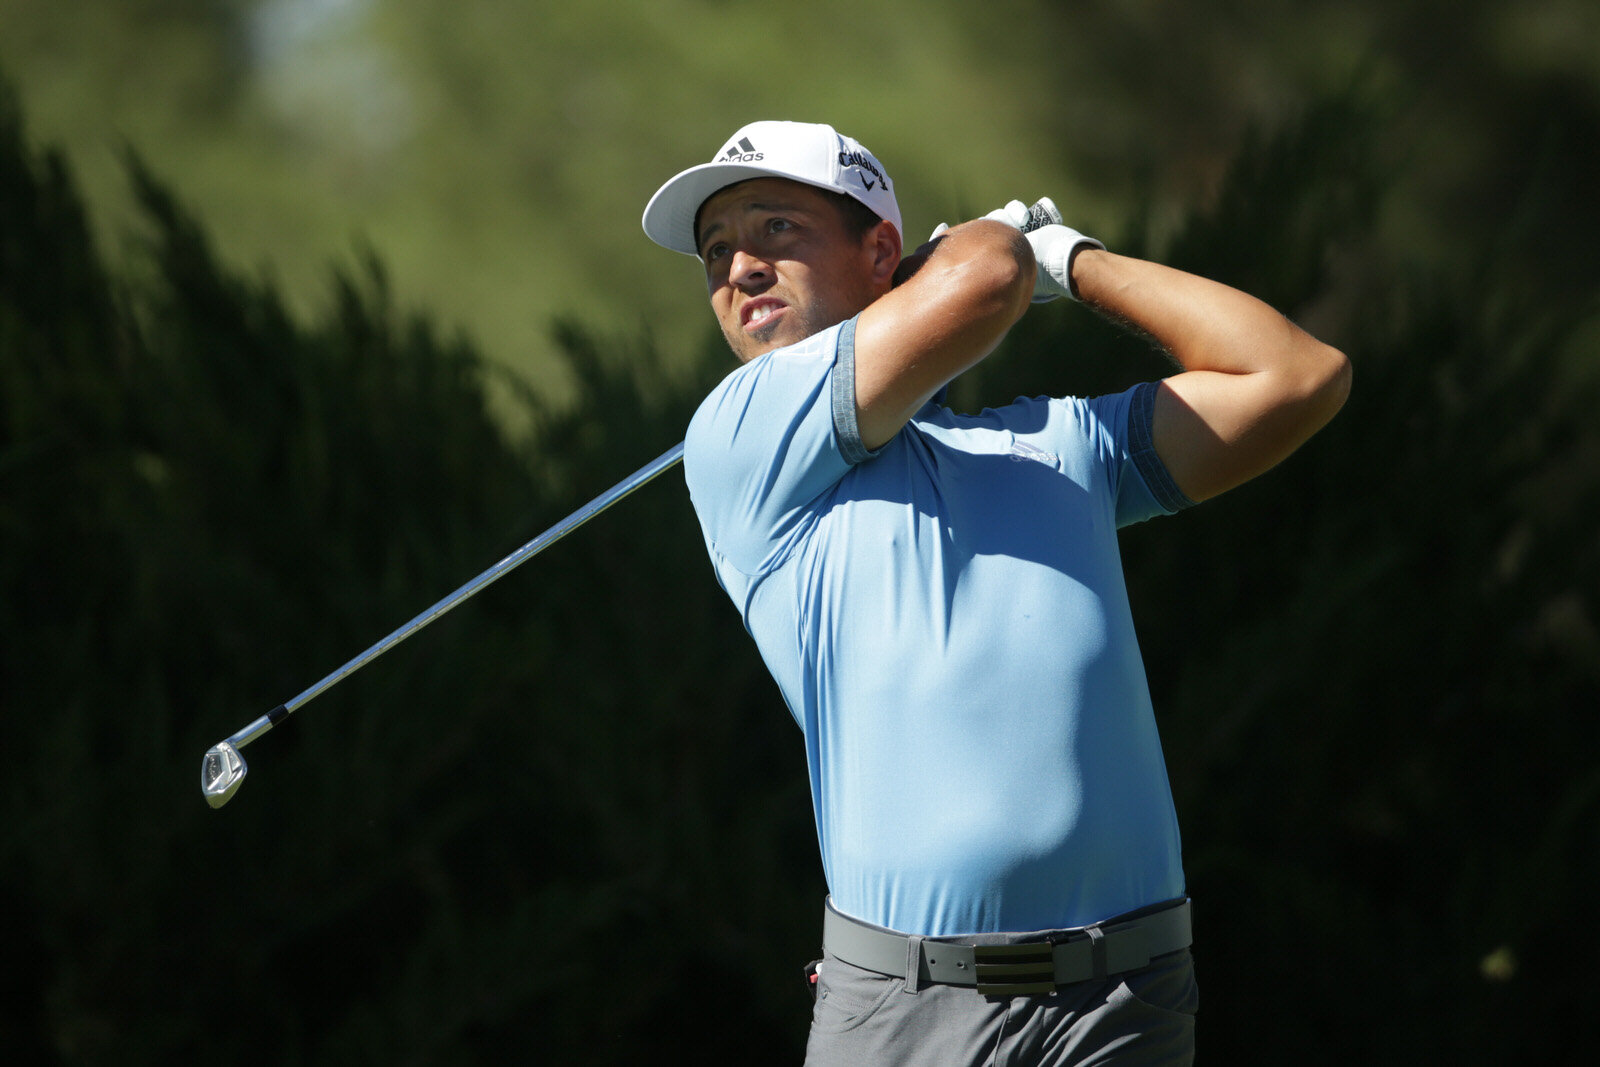  LAS VEGAS, NEVADA - OCTOBER 17: Xander Schauffele of the United States plays his shot from the fifth tee during the third round of The CJ Cup @ Shadow Creek on October 17, 2020 in Las Vegas, Nevada. (Photo by Jeff Gross/Getty Images) 